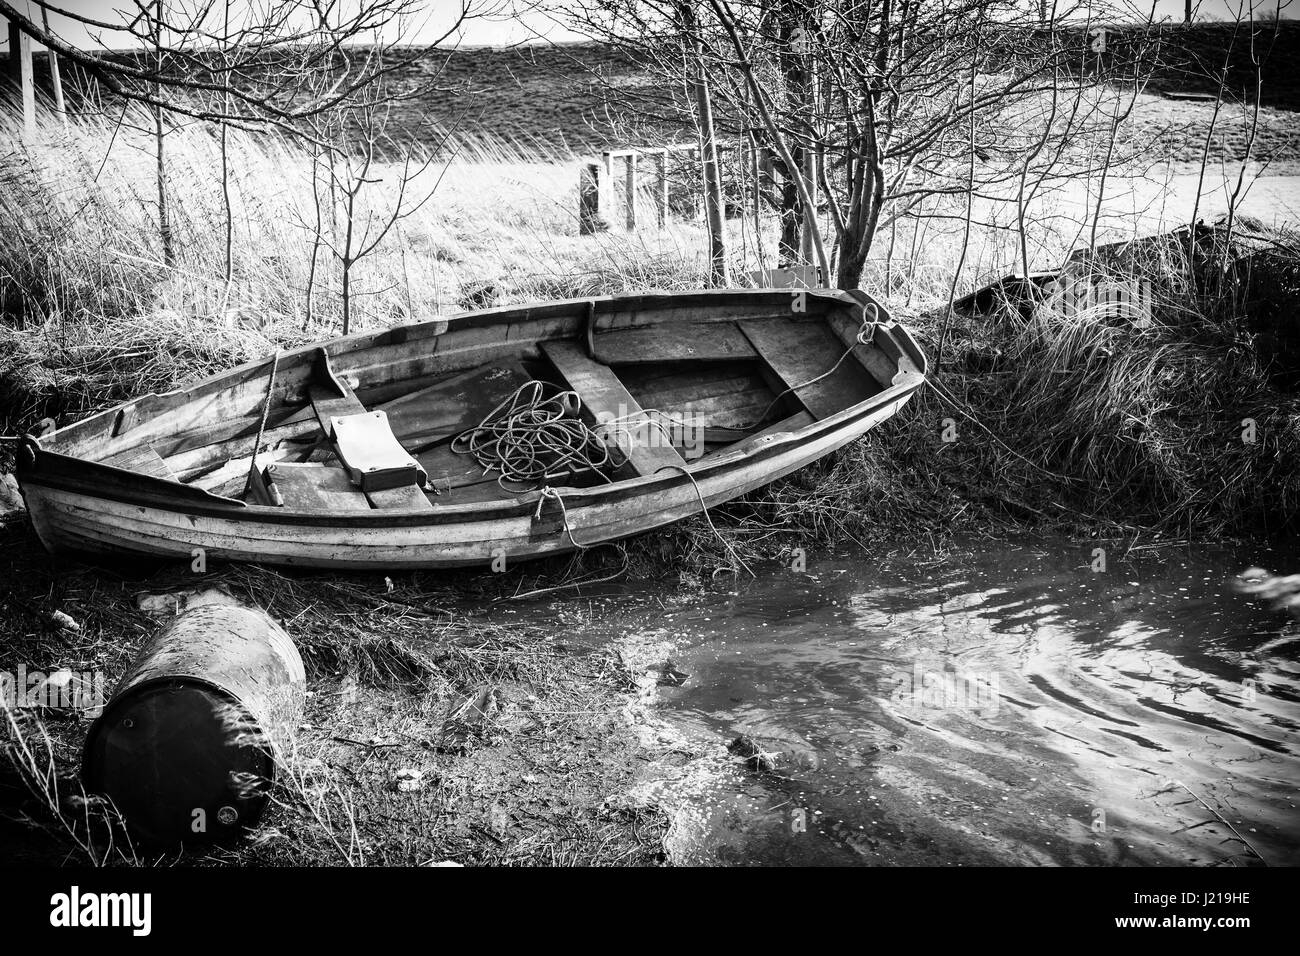 old row boat aground with oil or chemical contaner on it's side in the foreground Stock Photo